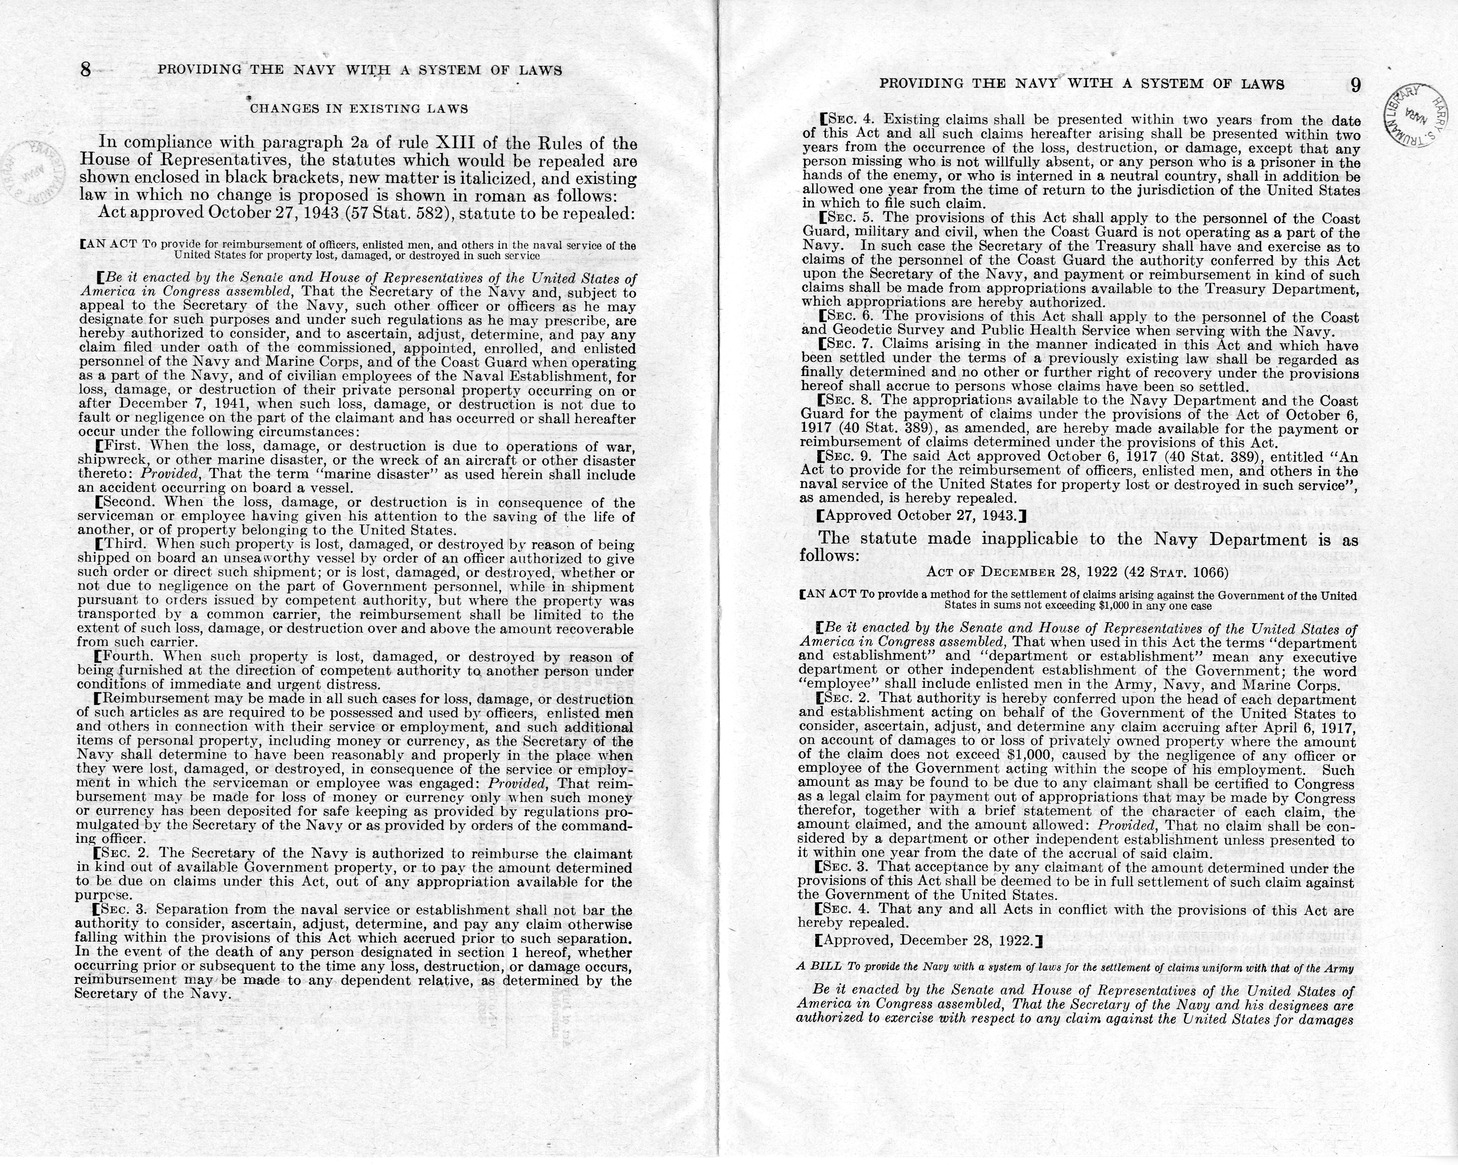 Memorandum from Frederick J. Bailey to M. C. Latta, H.R. 3759, To Provide the Navy with a System of Laws for the Settlement of Claims Uniform with That of the Army, with Attachments